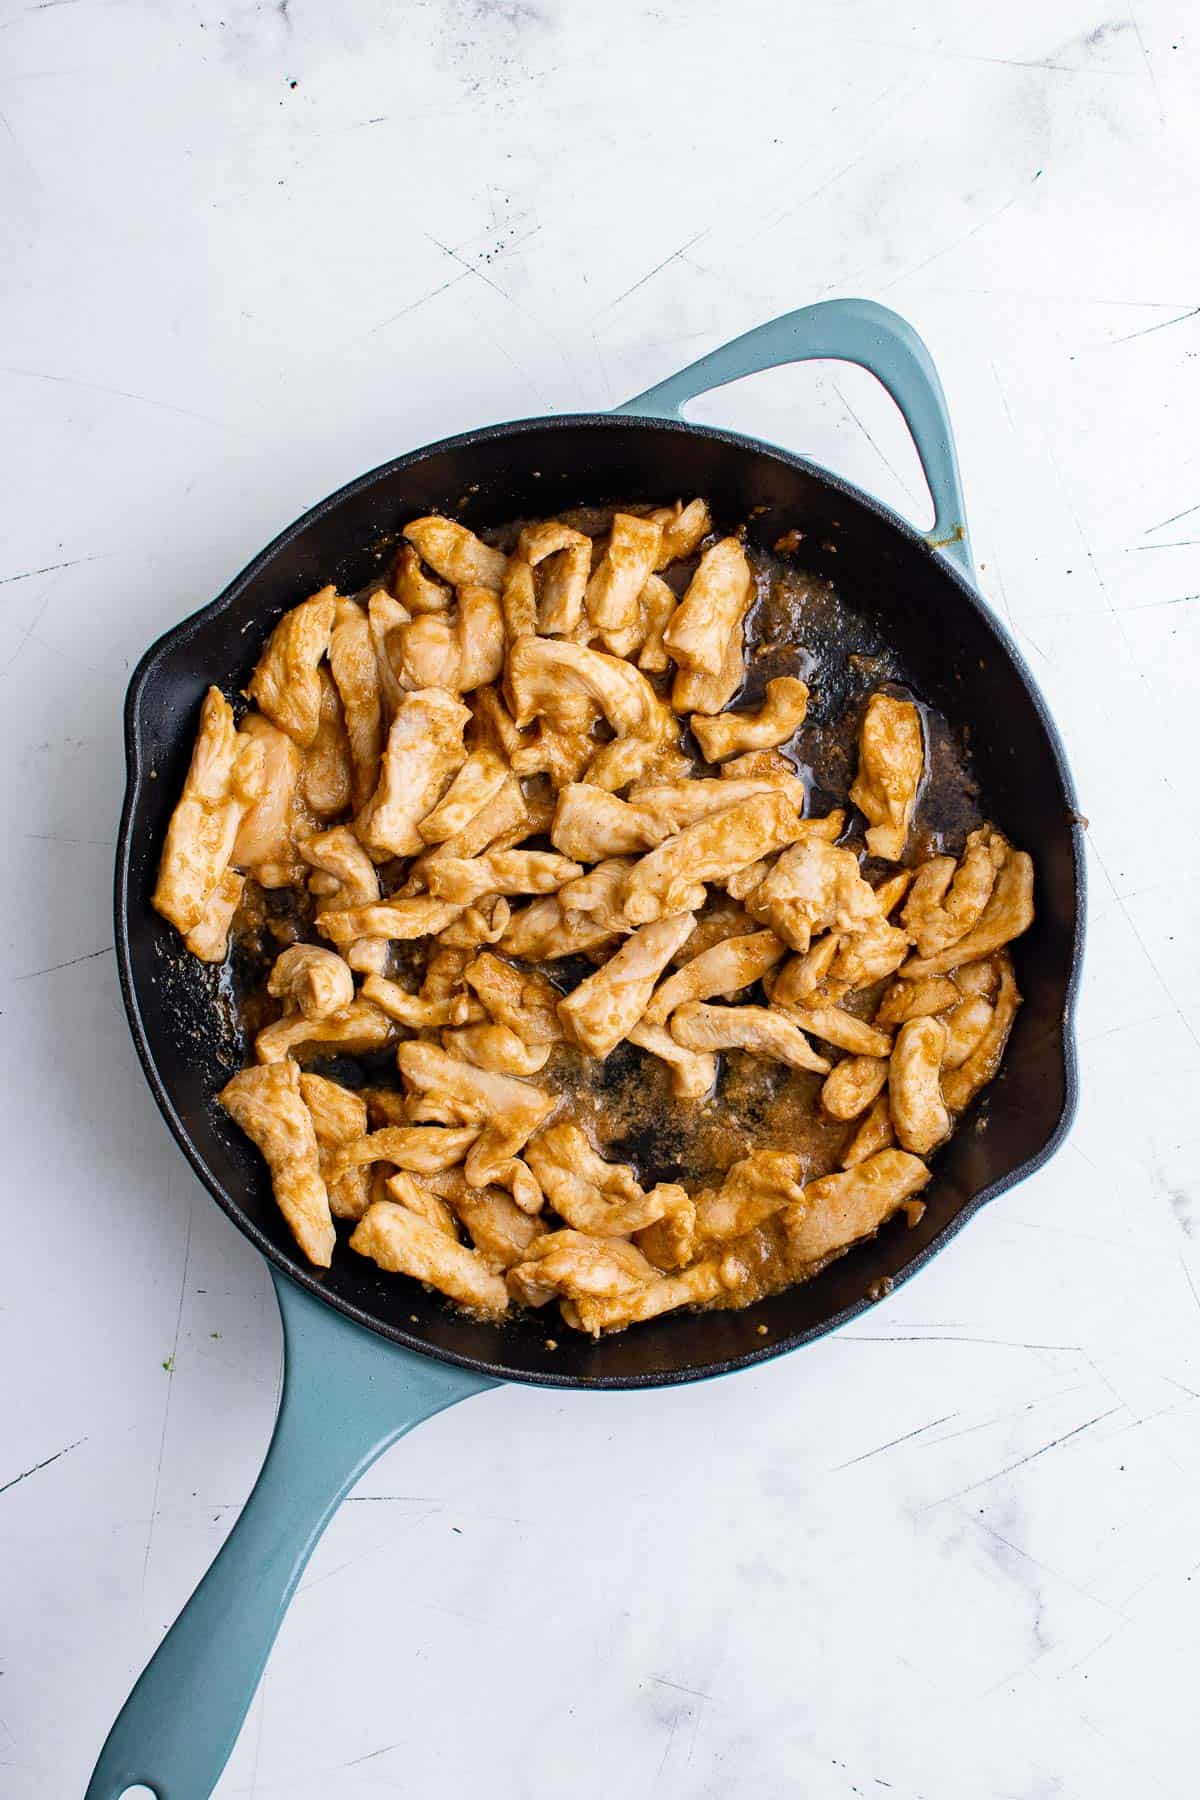 sliced chicken breast being cooked in a cast iron skillet in olive oil, water, and fajita seasonings